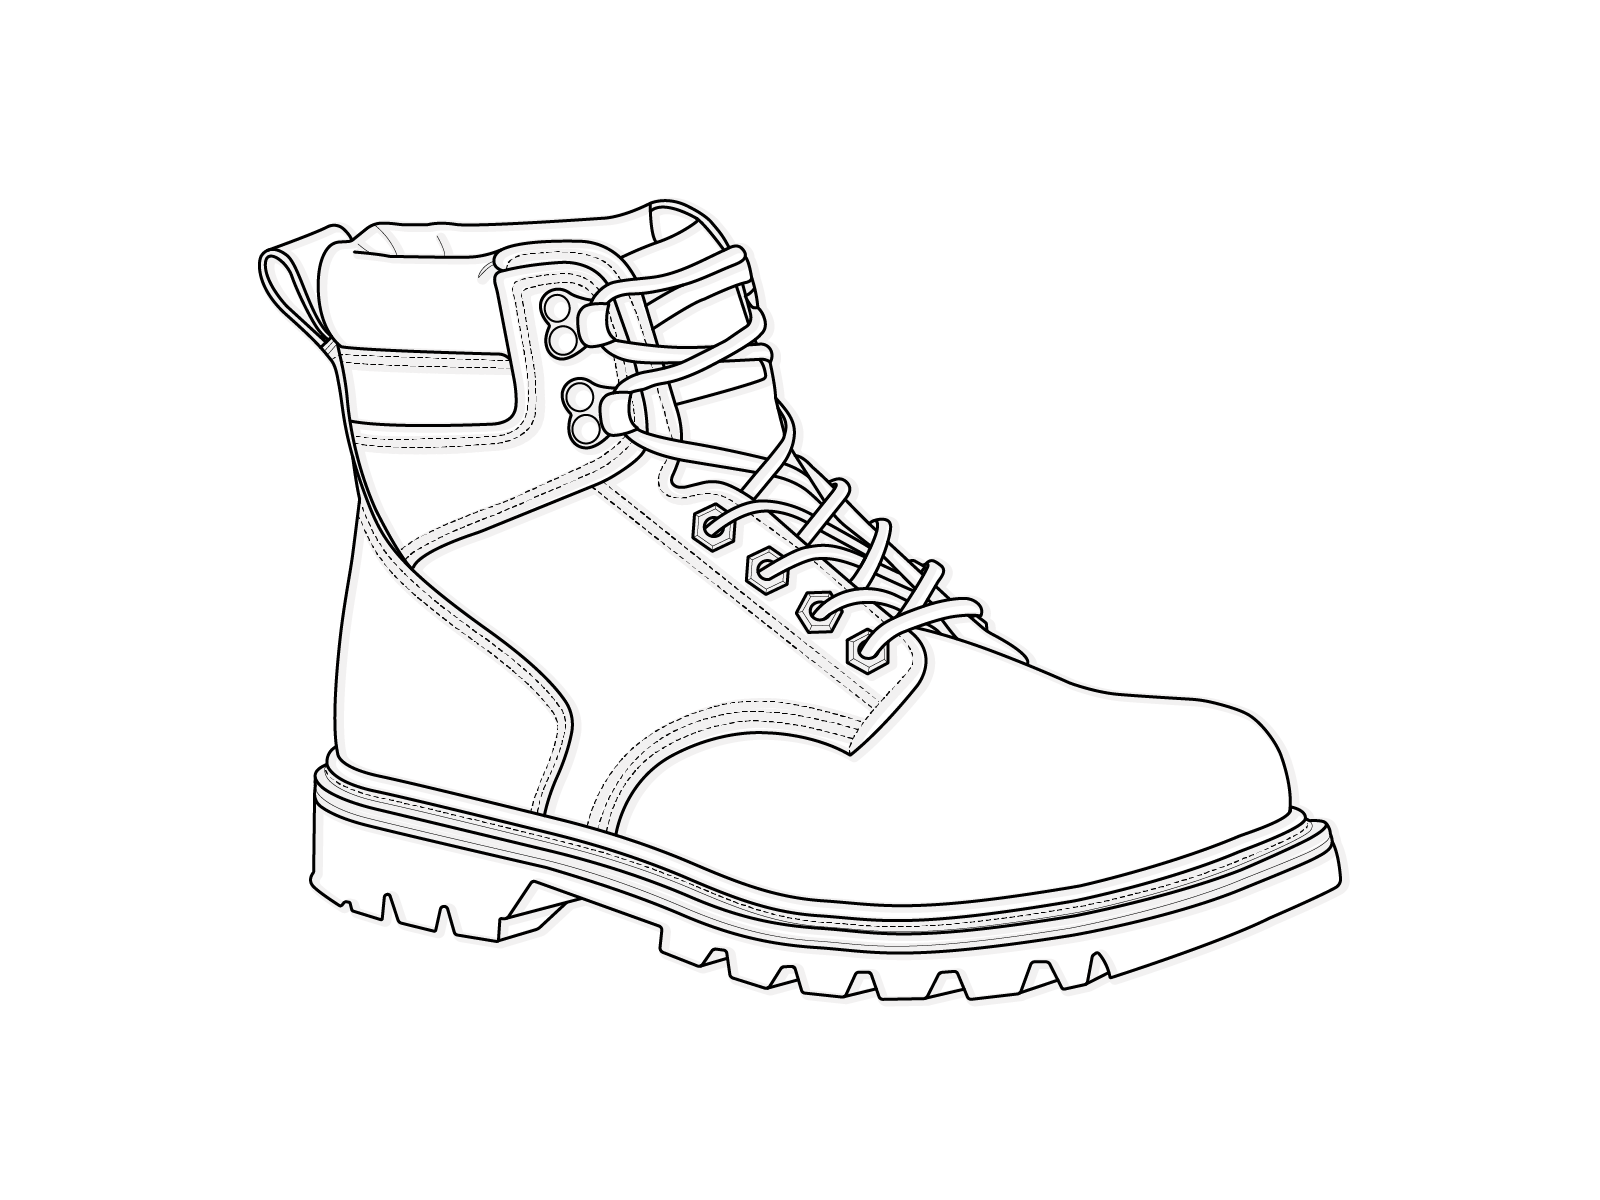 CAT Boot by Simply Lines on Dribbble